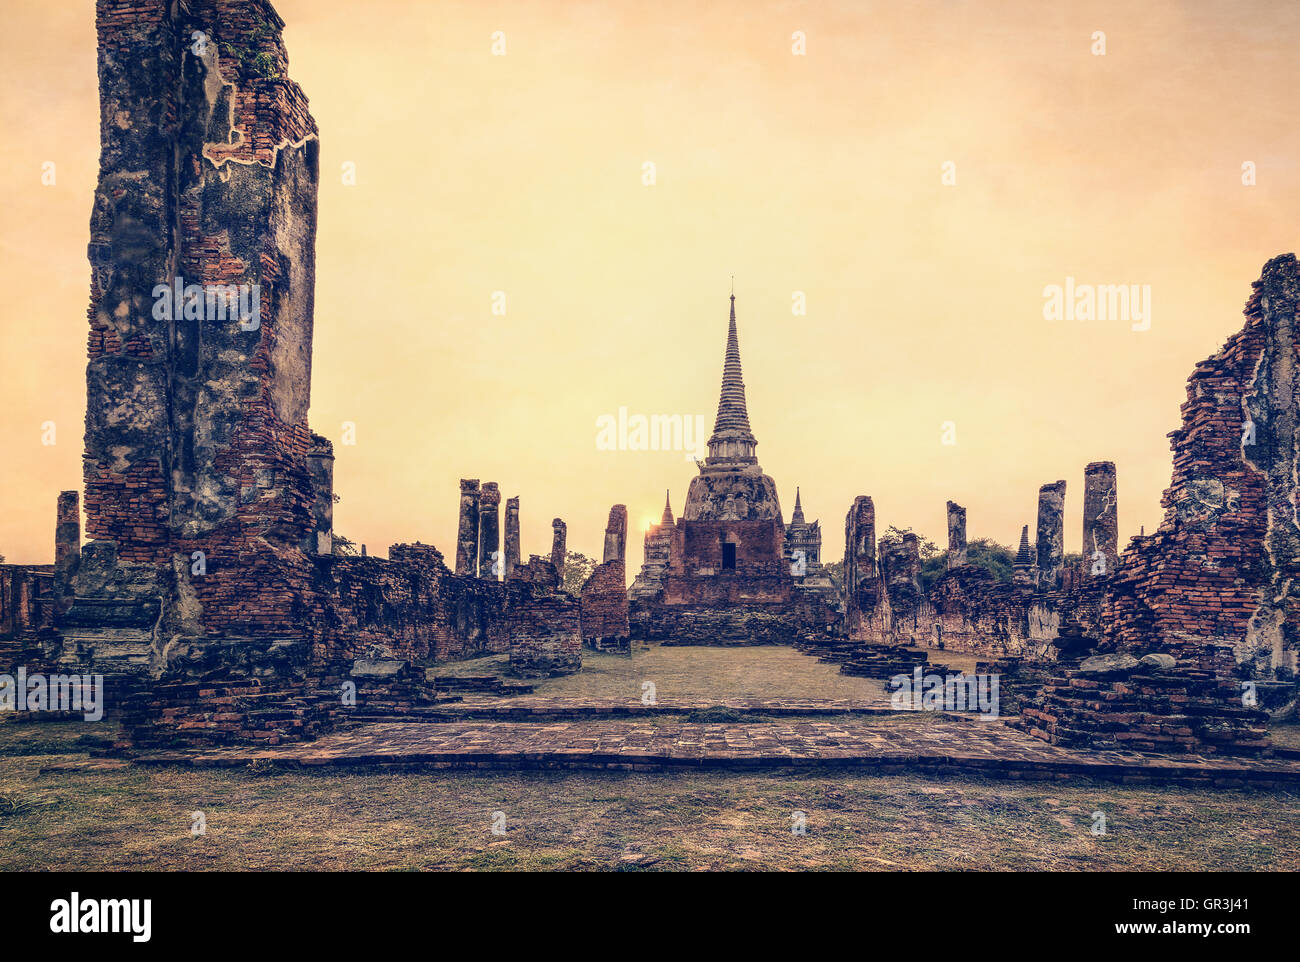 Vintage style add texture effect, ancient ruins and pagoda of Wat Phra Si Sanphet old temple famous attractions during sunset Stock Photo